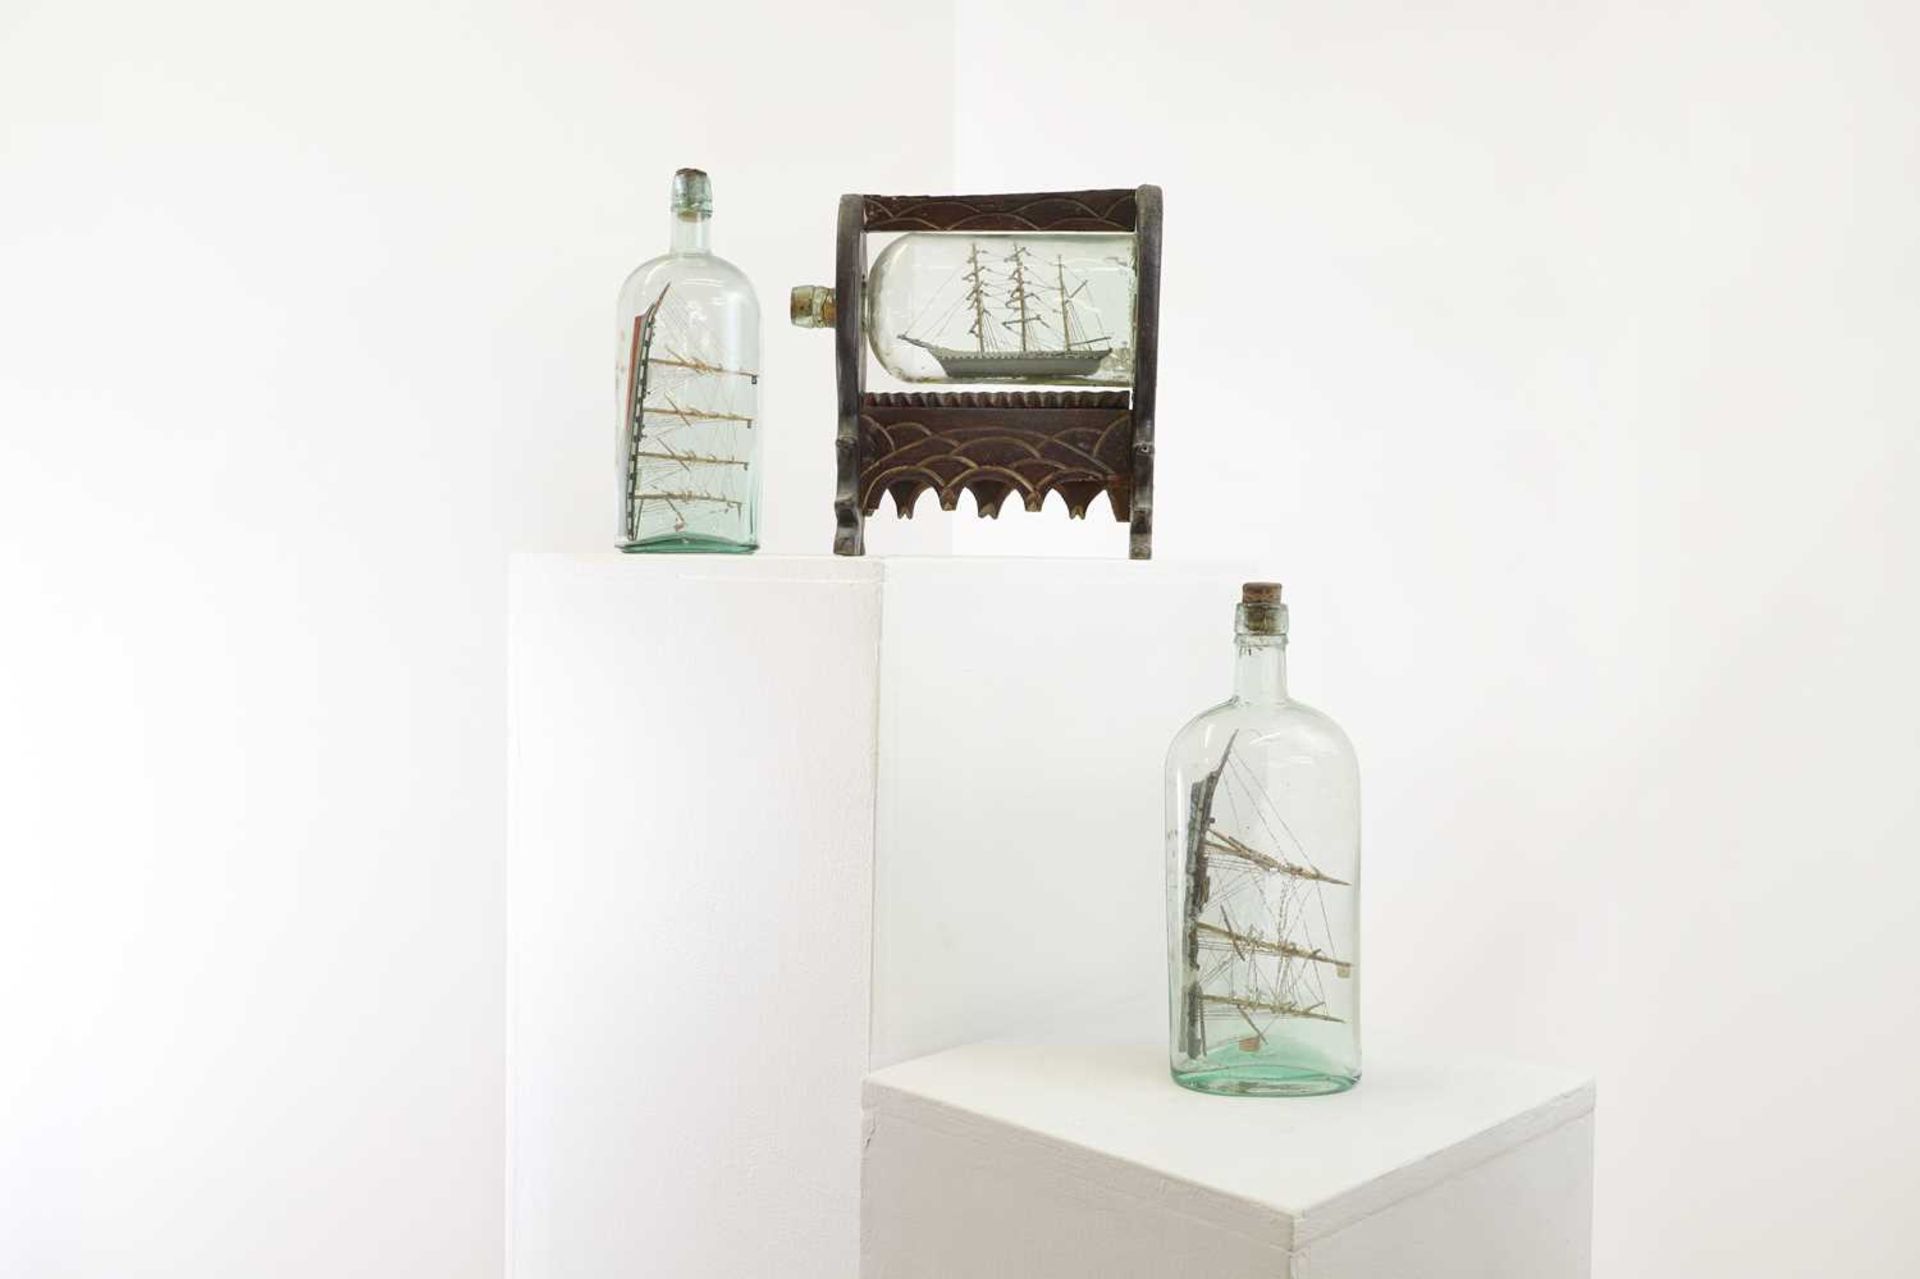 A group of three ships in bottles,